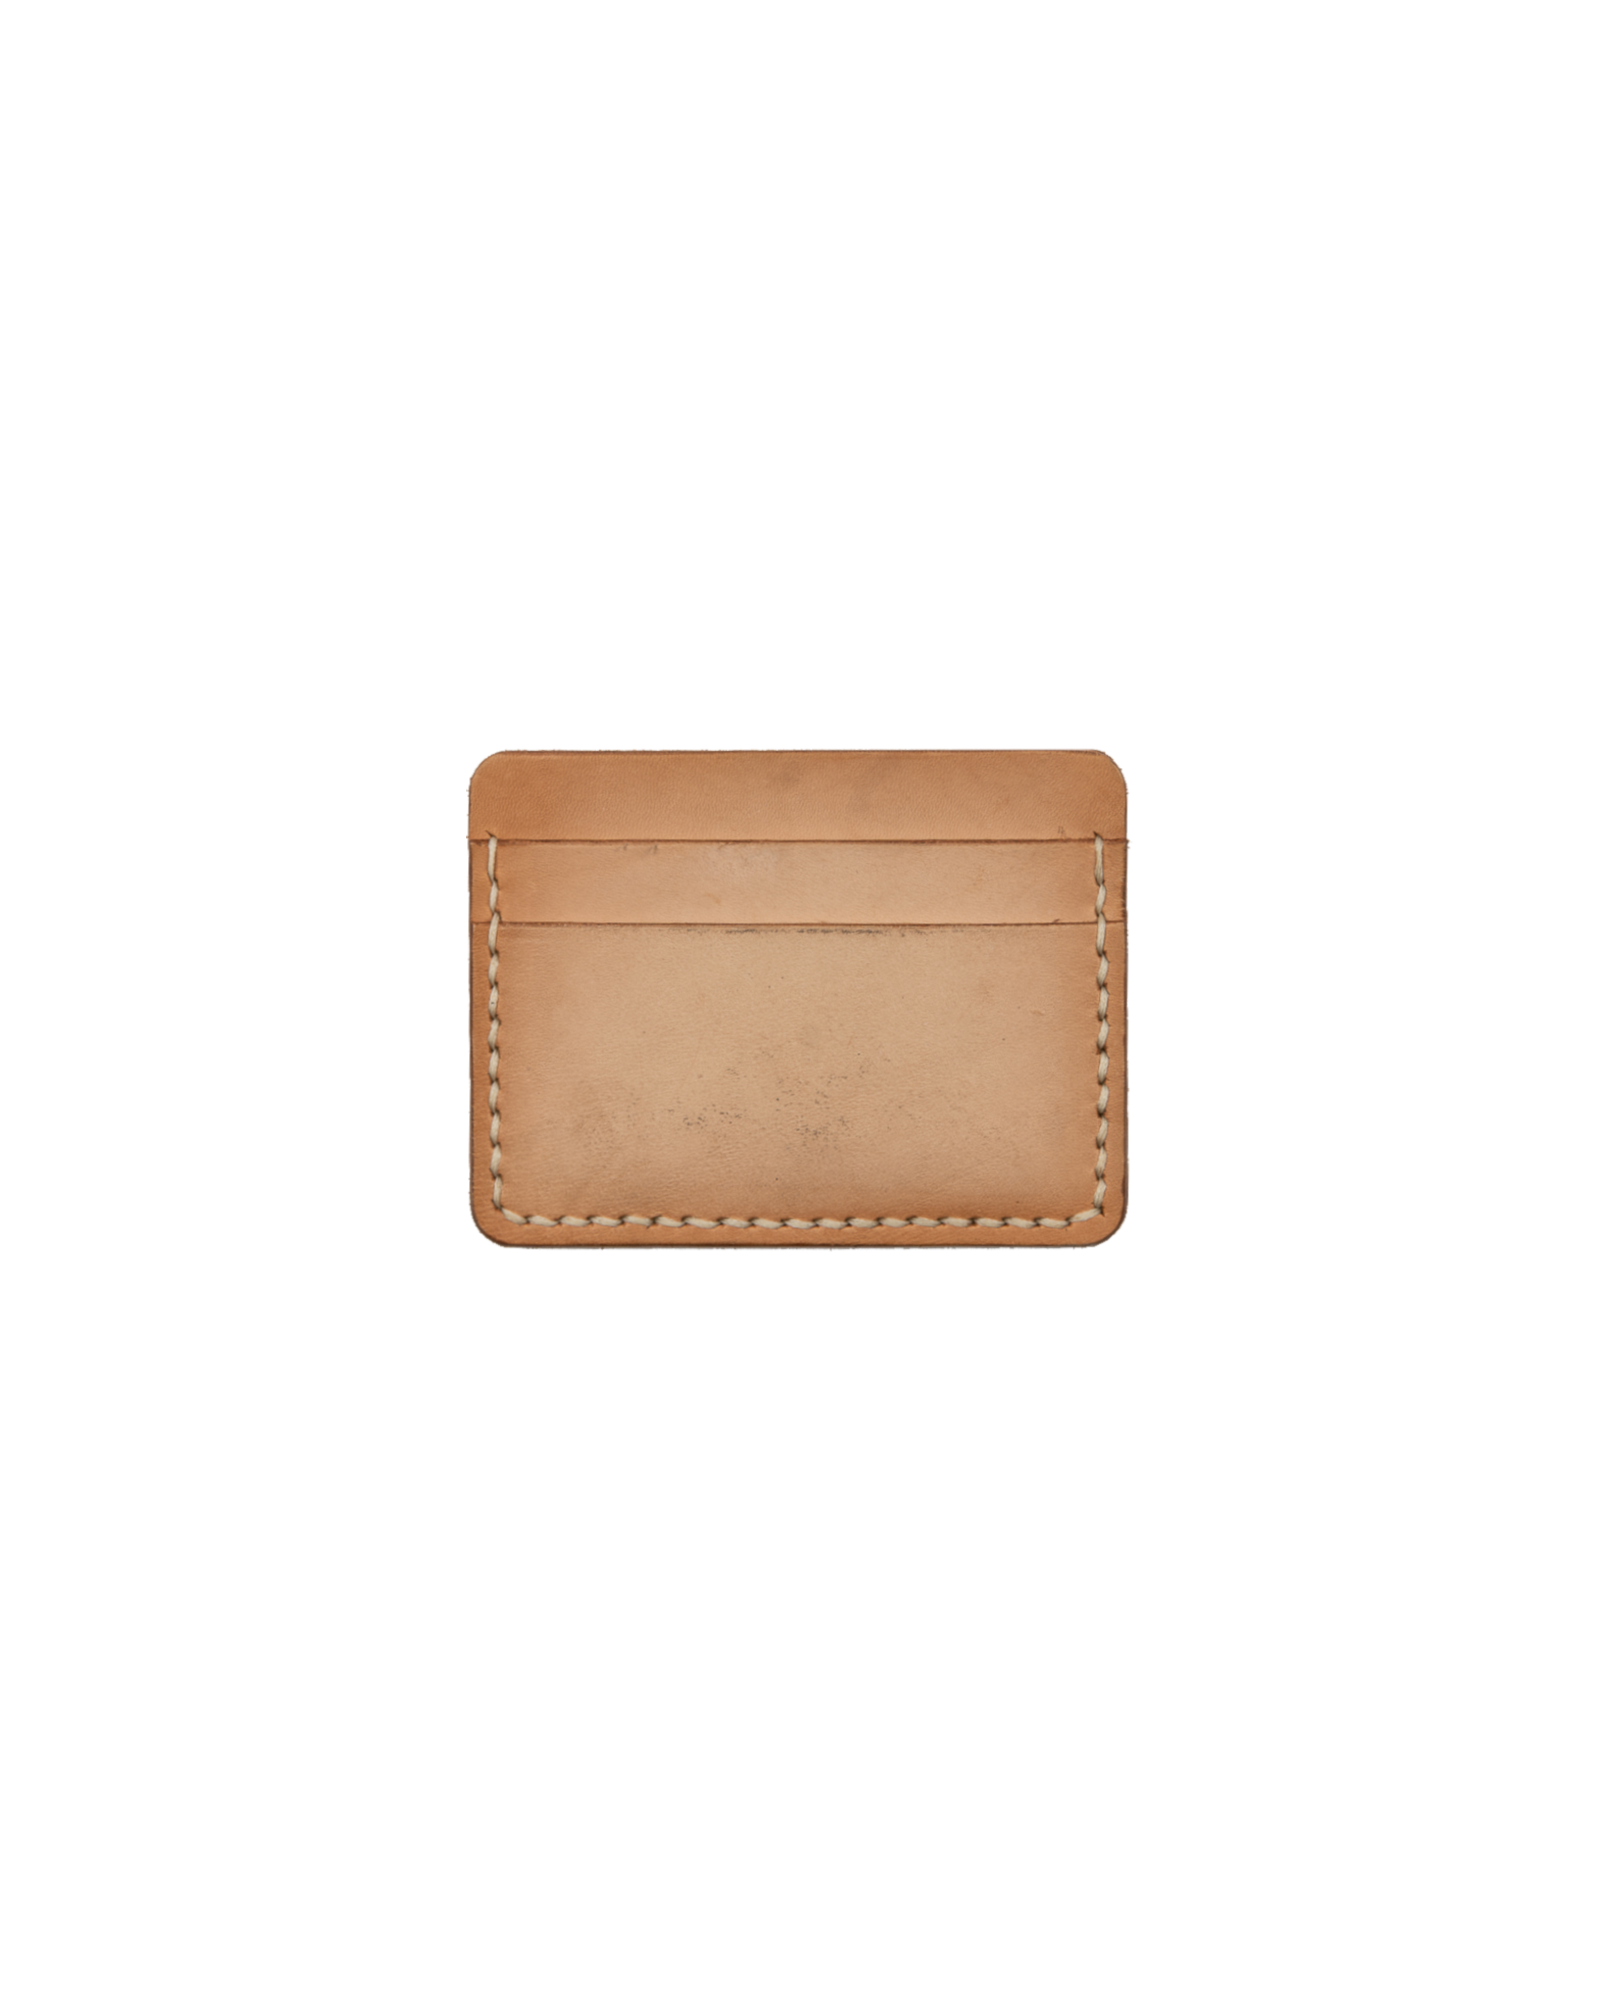 Mister Green - Accessory - Classic Card Case  - Leather - Natural